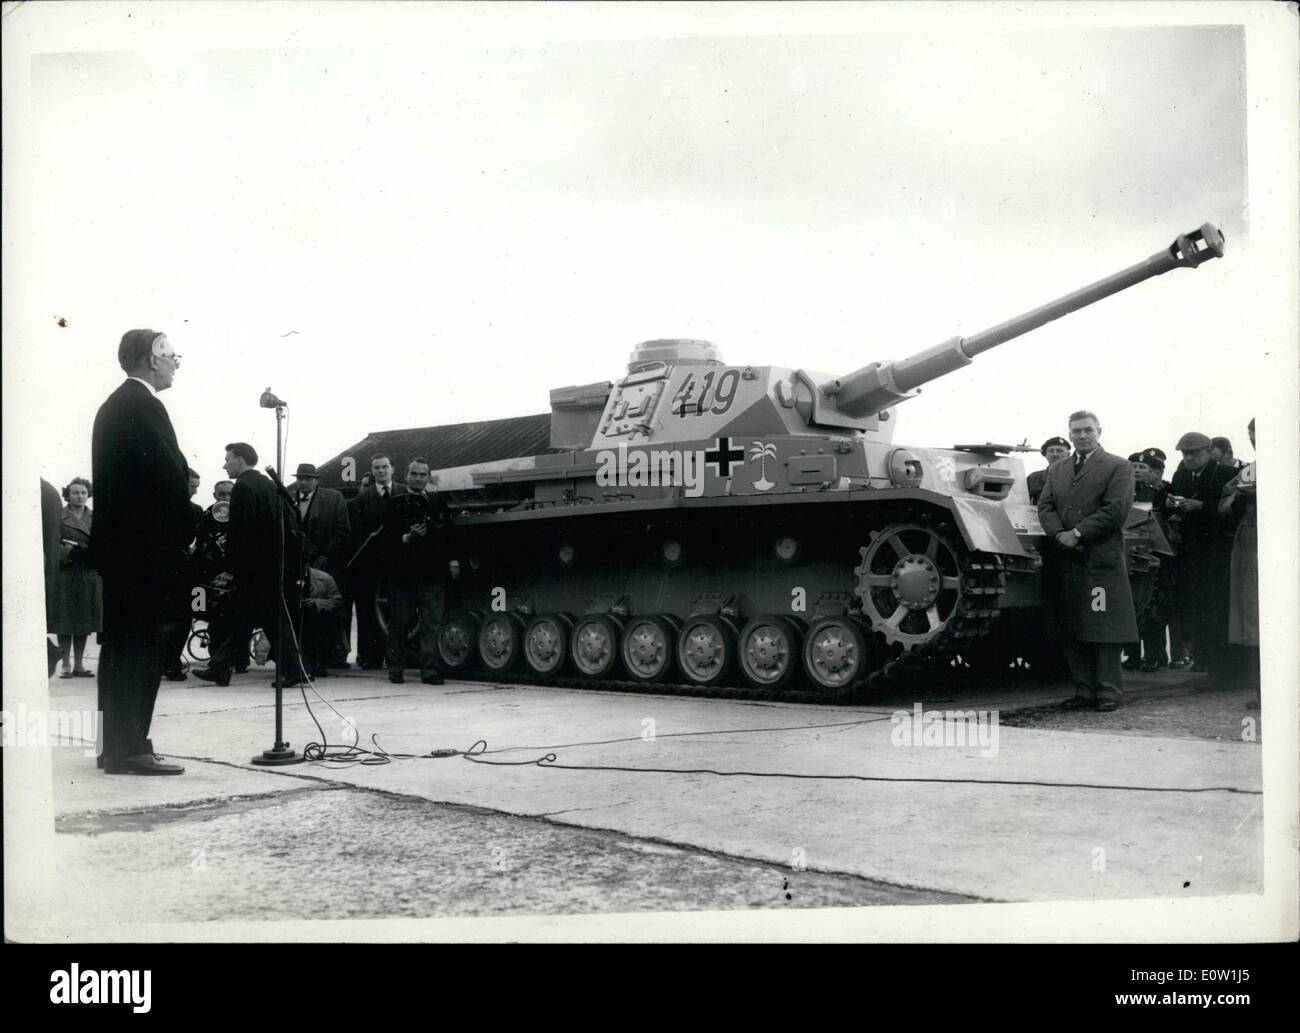 Nov. 11, 1960 - The Germans Get Their Panzer Tank Back: A German Panzer tank captured in the Western Desert from Rommel's Affrika was handed back to the Germans at a ceremony at Bovington camp in Dorset today. It was received by the German Ambassador in London, Herr Hans Von Herwarth, for the New German Army. The presentation was made by by the Chairman of the Trustees of the Tank Museum at Bovington, General Sir Richard McCreery.,a former Western Desert Commander. Photo Shows Herr Hans Von Herwarth, the German Ambassador, makes a speech after the handing-over ceremony at Bovington today. Stock Photo